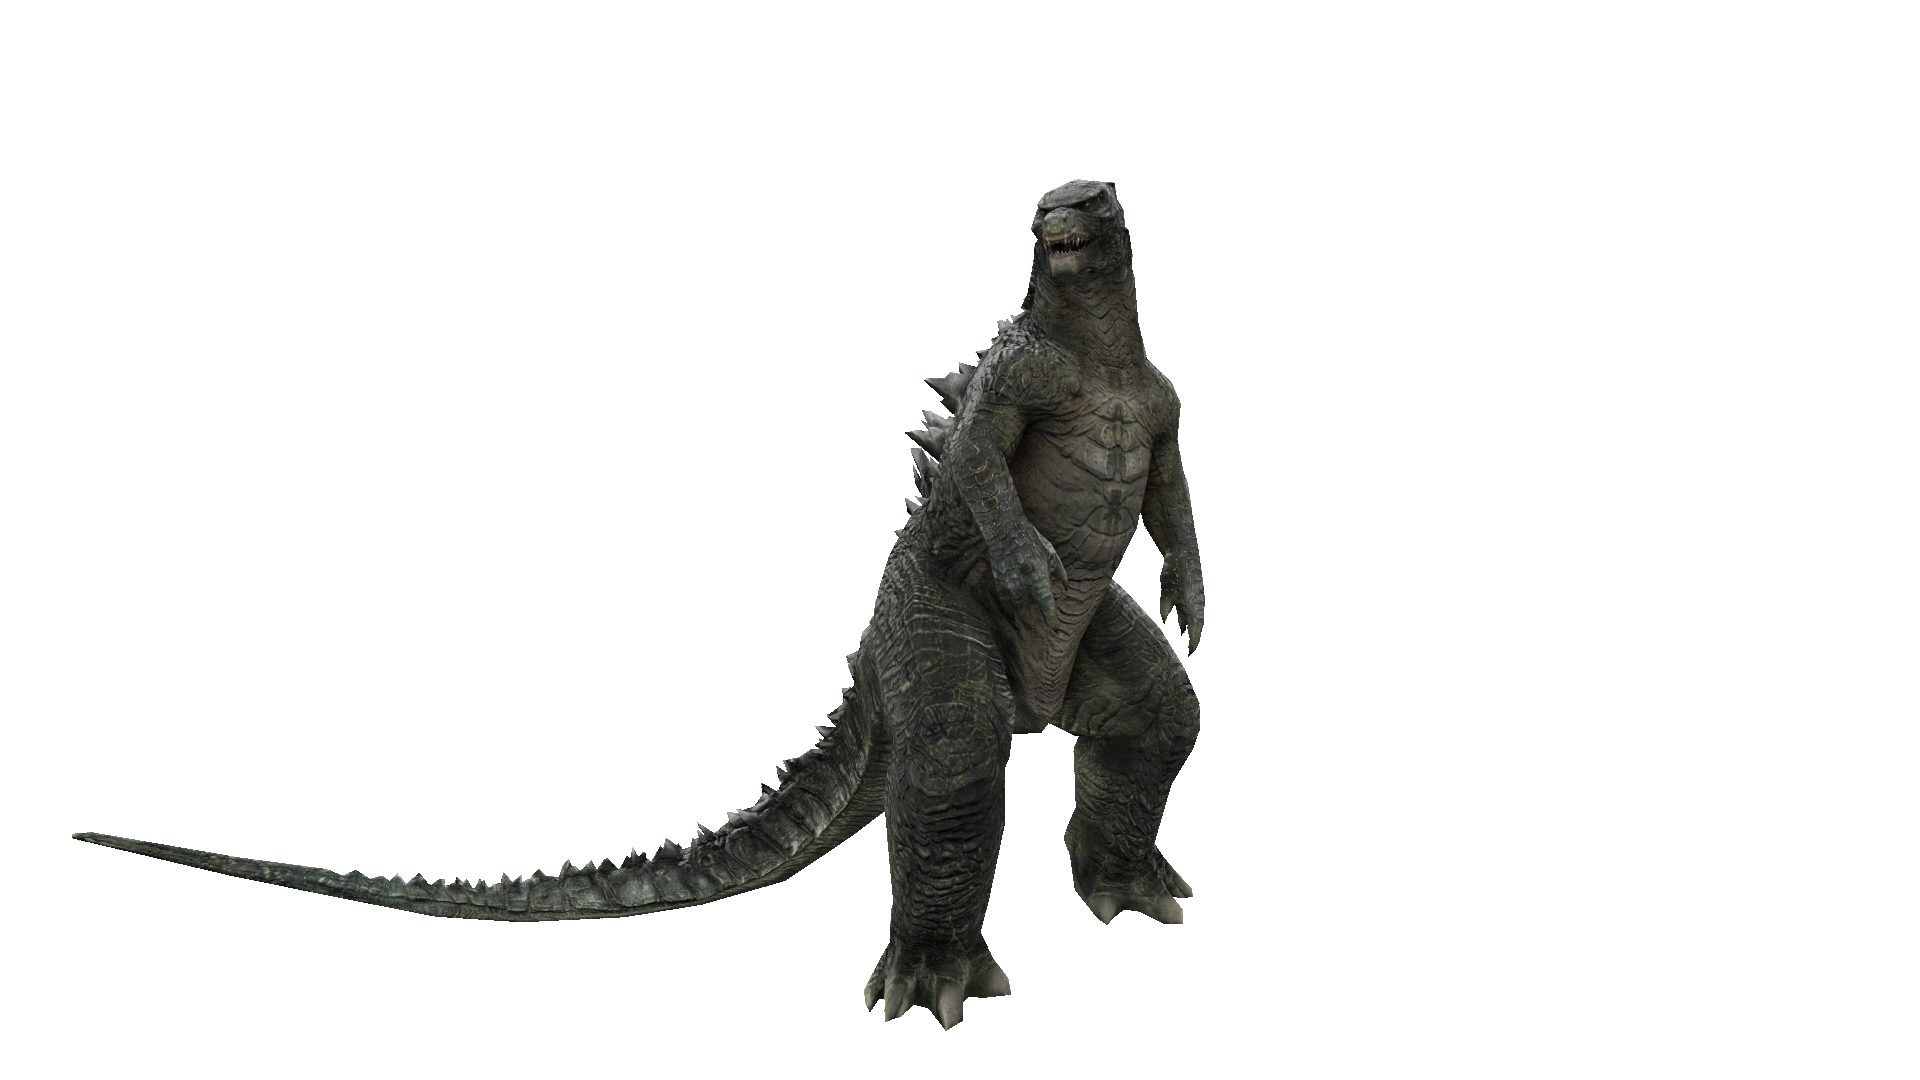 Godzilla Looking Stance Transparent By Digitalx40K Godzilla Looking Stance Transparent By Digitalx40K - Godzilla, Transparent background PNG HD thumbnail